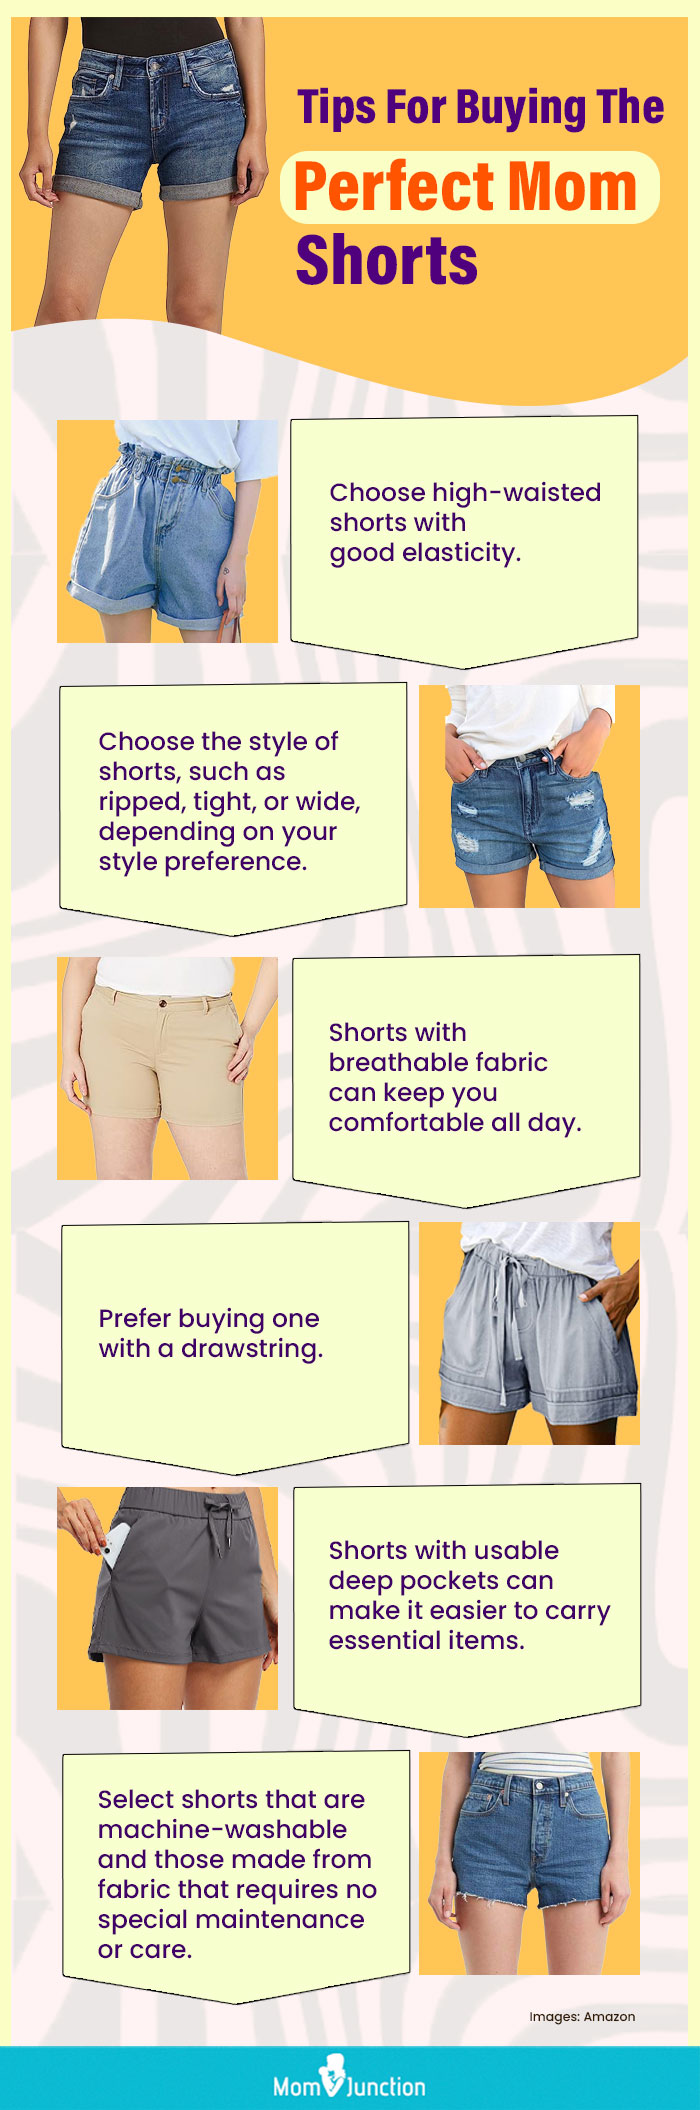 Tips For Buying The Perfect Mom Shorts (infographic)